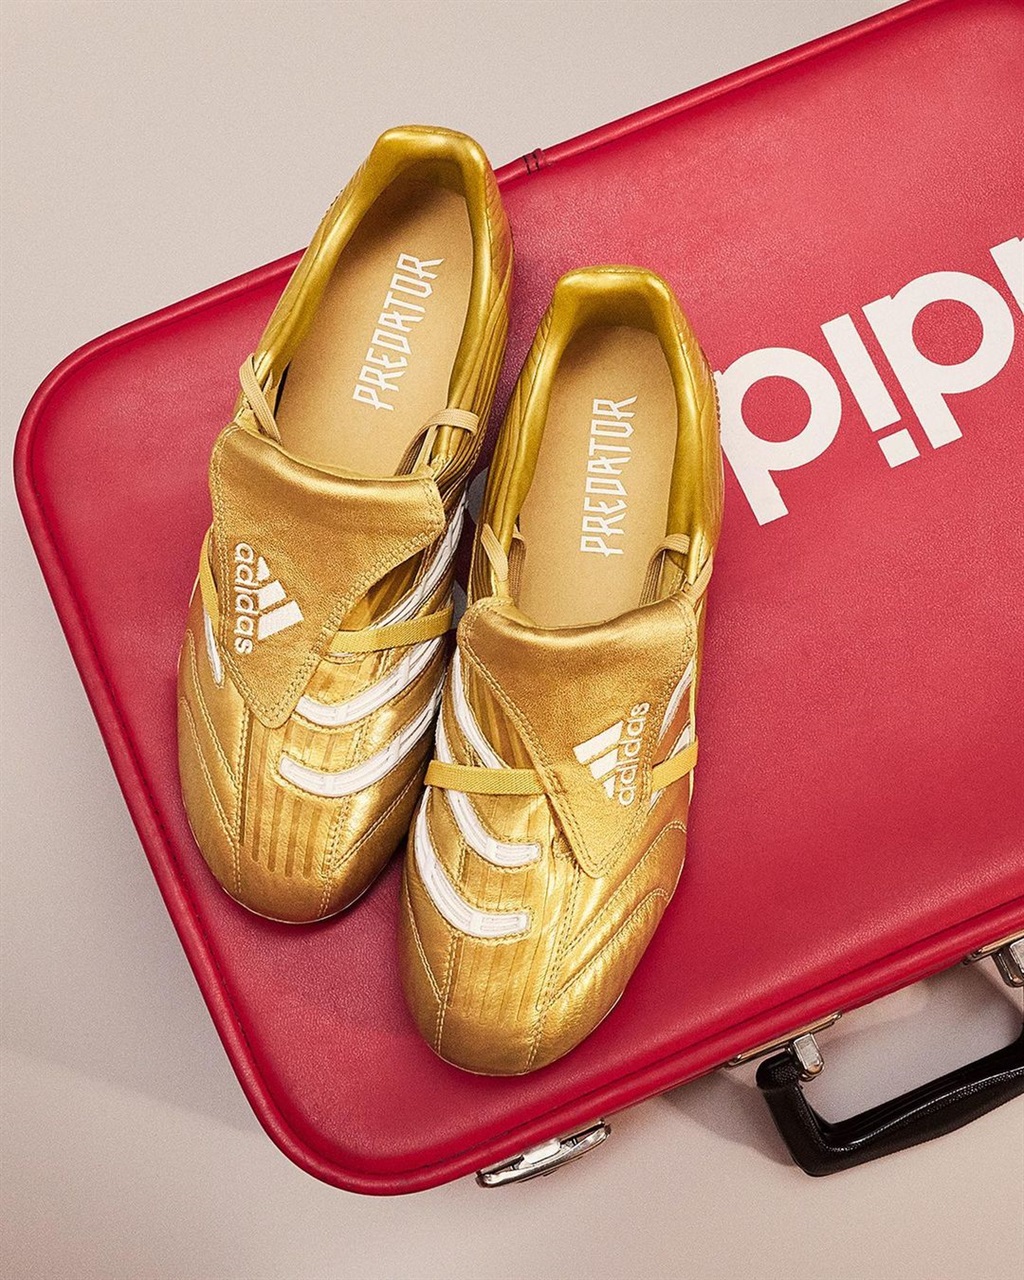 The gold Adidas Predator Absolute boots.